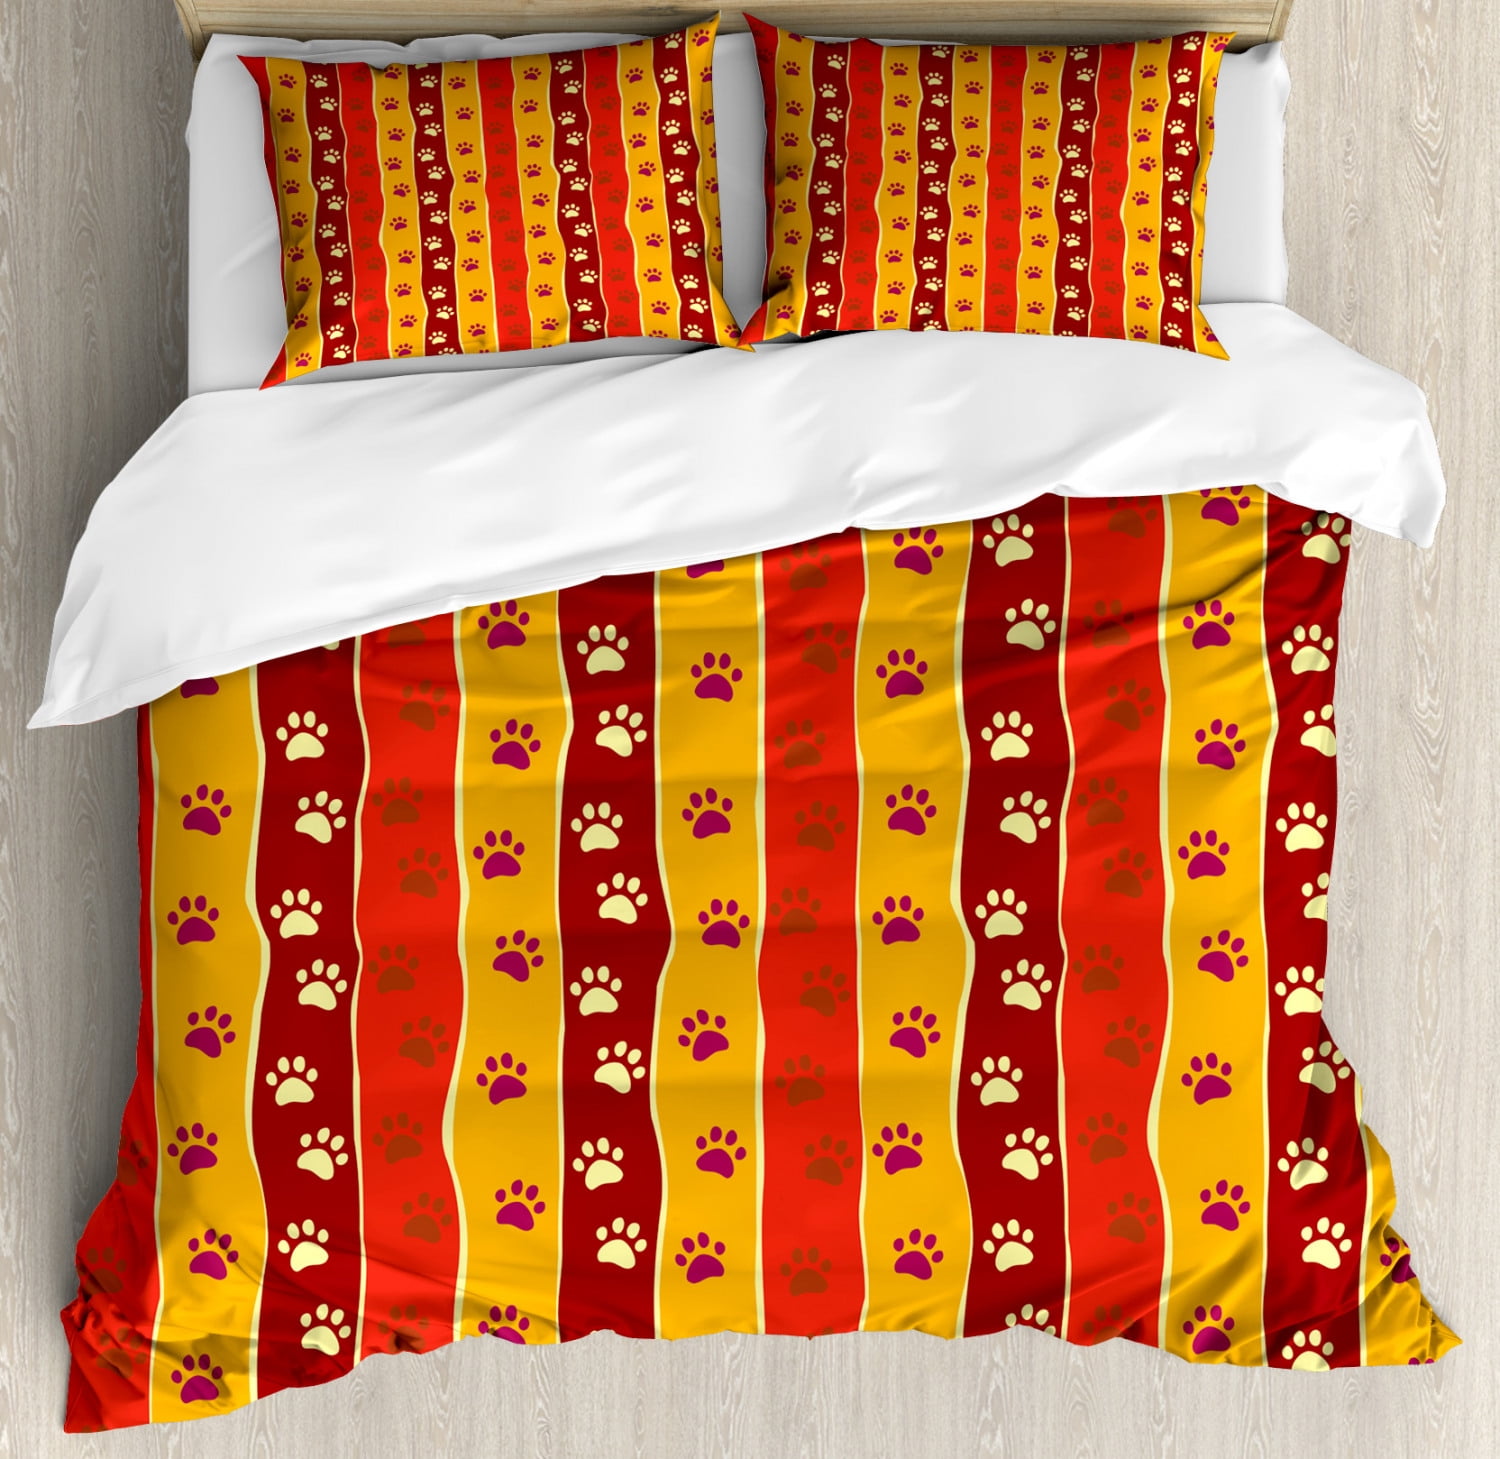 Red And Brown Duvet Cover Set King Size, Red Brown Duvet Covers